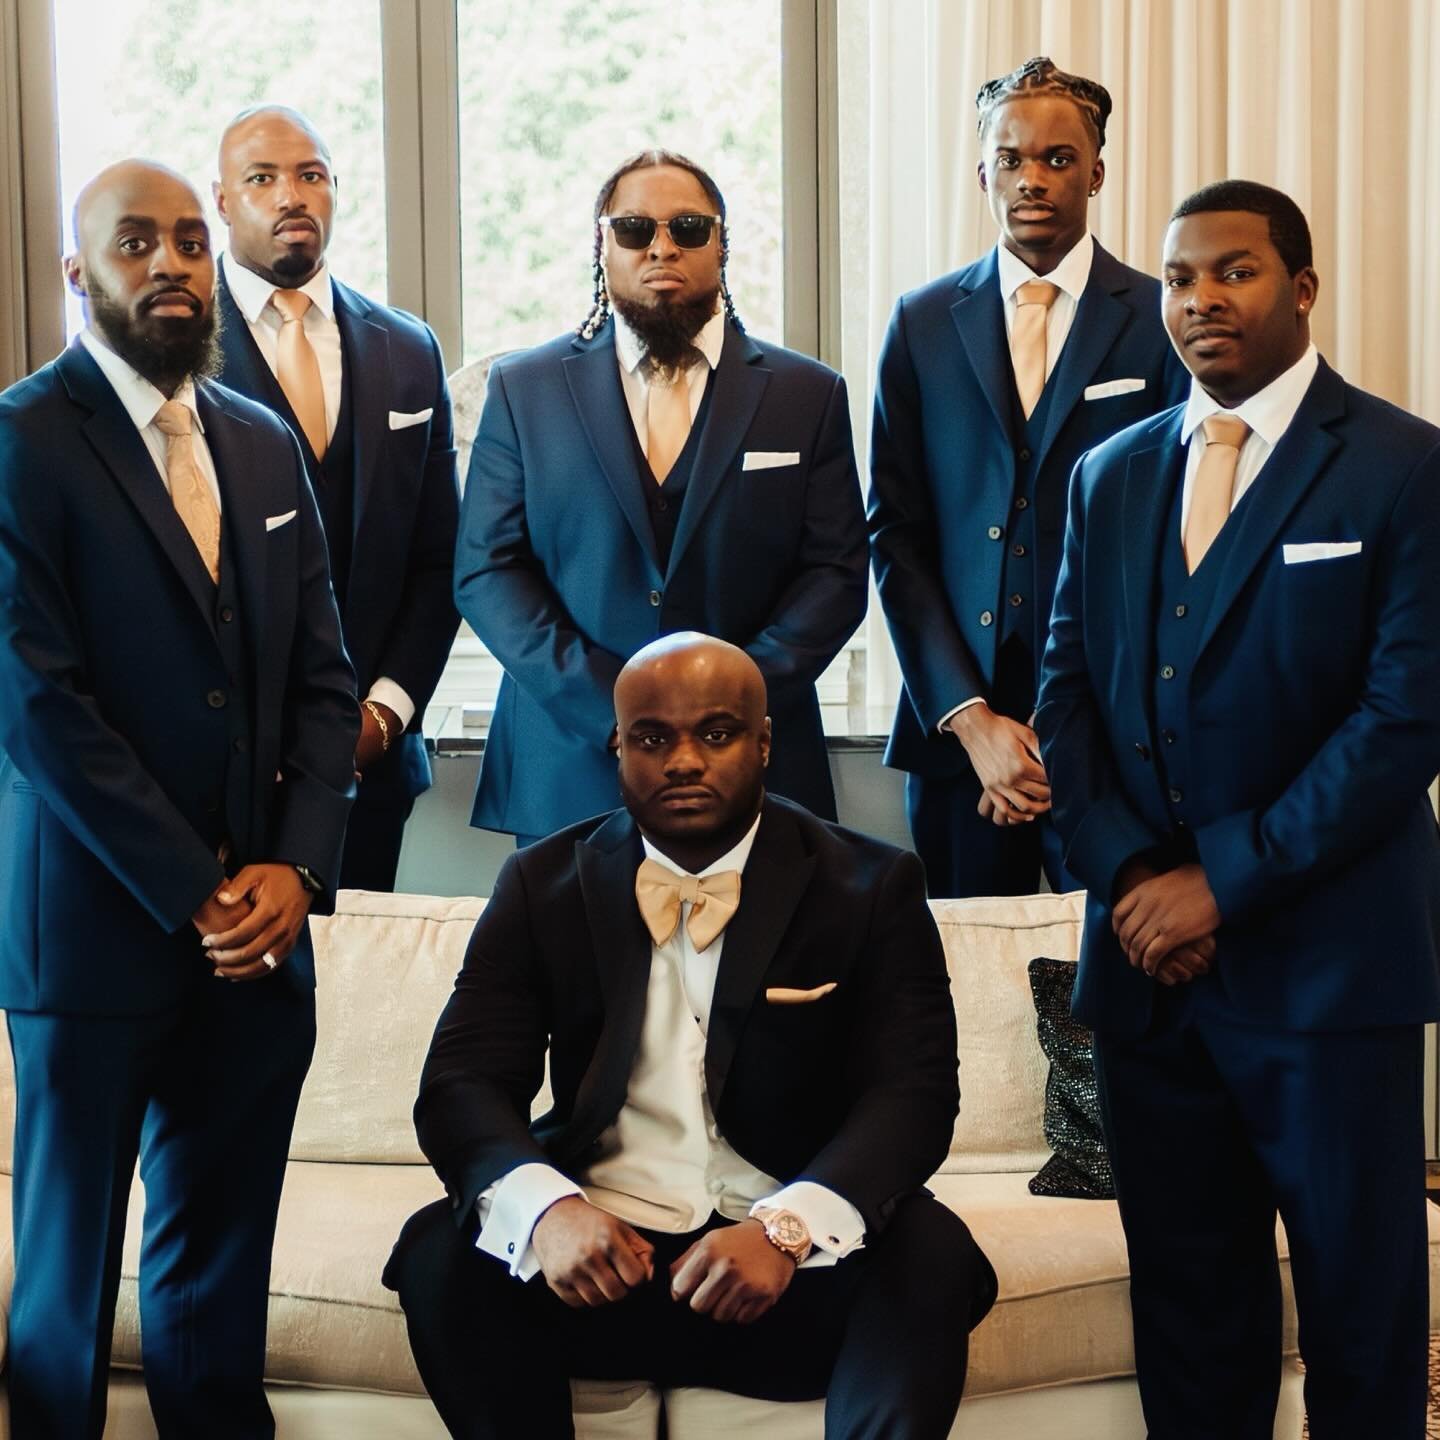 The Groom and the Groomsmen. 🫡✊🏿

Kudos to @rcg_photography_ for multitasking as the groomsmen and the man behind the lens! Talk about having your back and capturing it in style! 

#Groomsmen #Groom #Brotherhood #GroomPrep #Wedding #GroomSuit #Groo